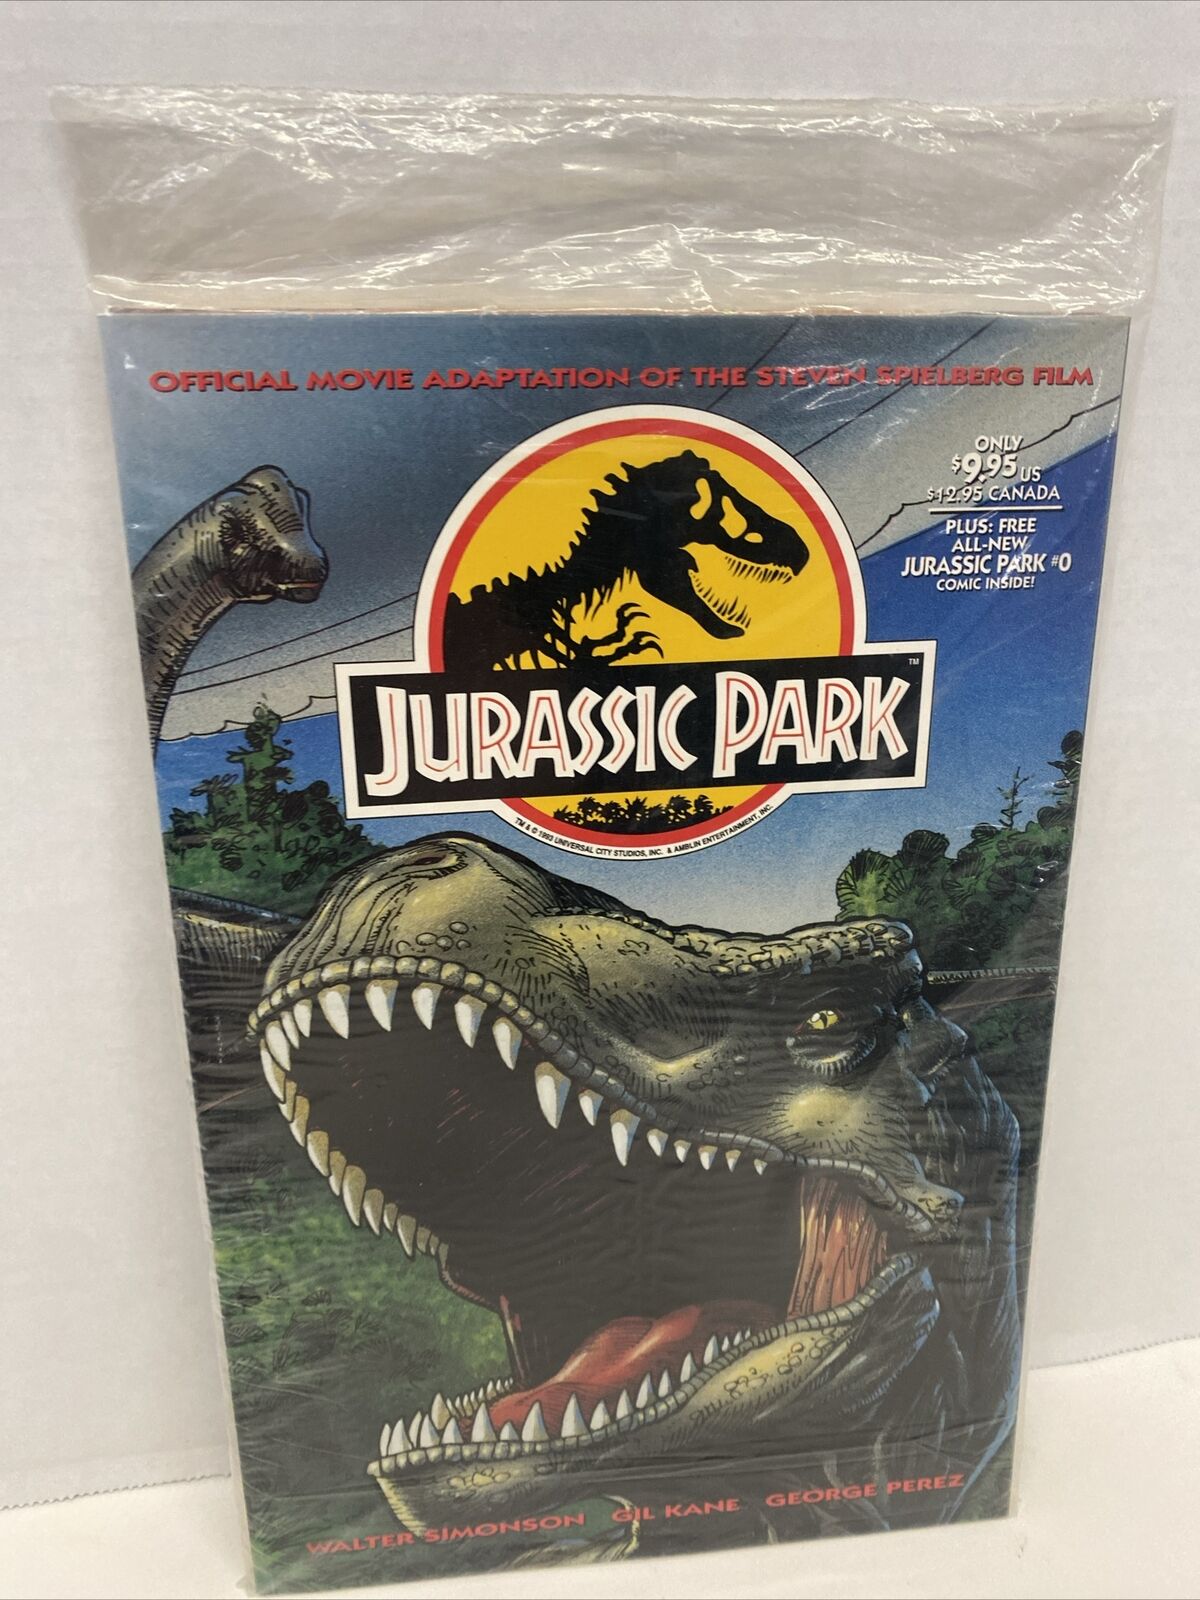 Jurassic Park Official Movie Adaptation Trade Paperback + #0 Polybag Sealed - NM